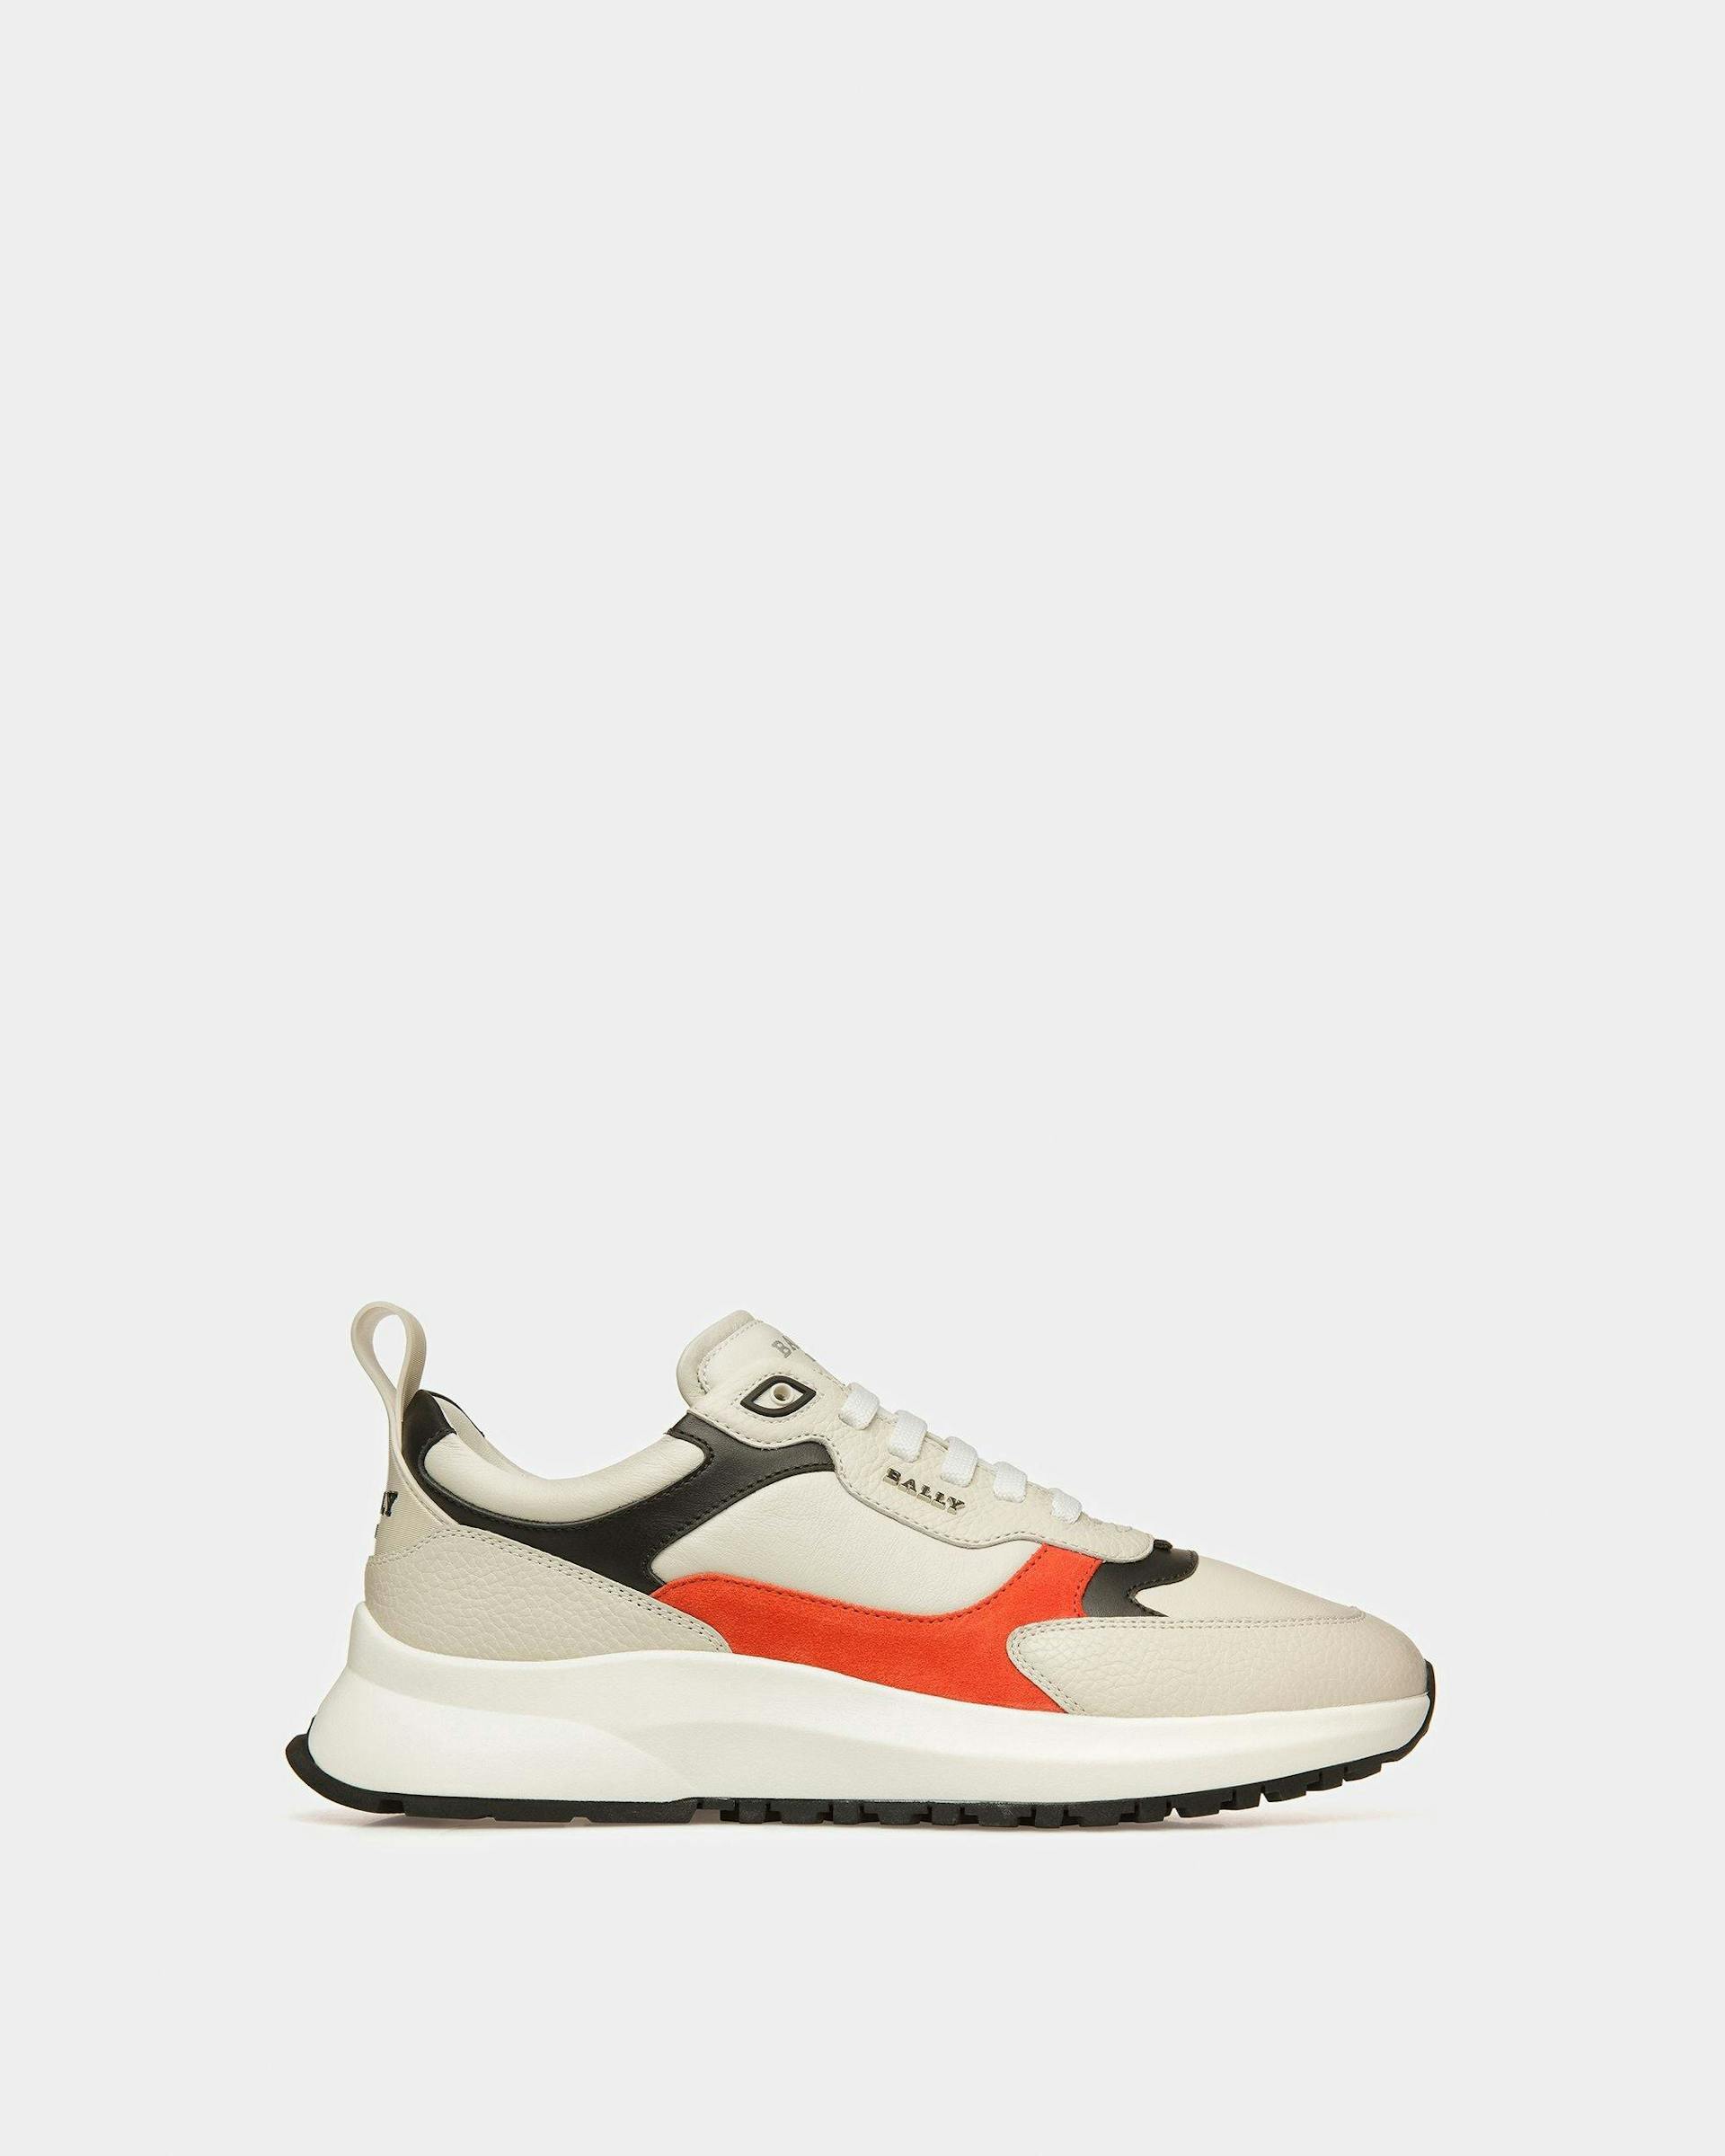 Dave Leather And Fabric Sneakers In Dusty White And Orange - Men's - Bally - 01